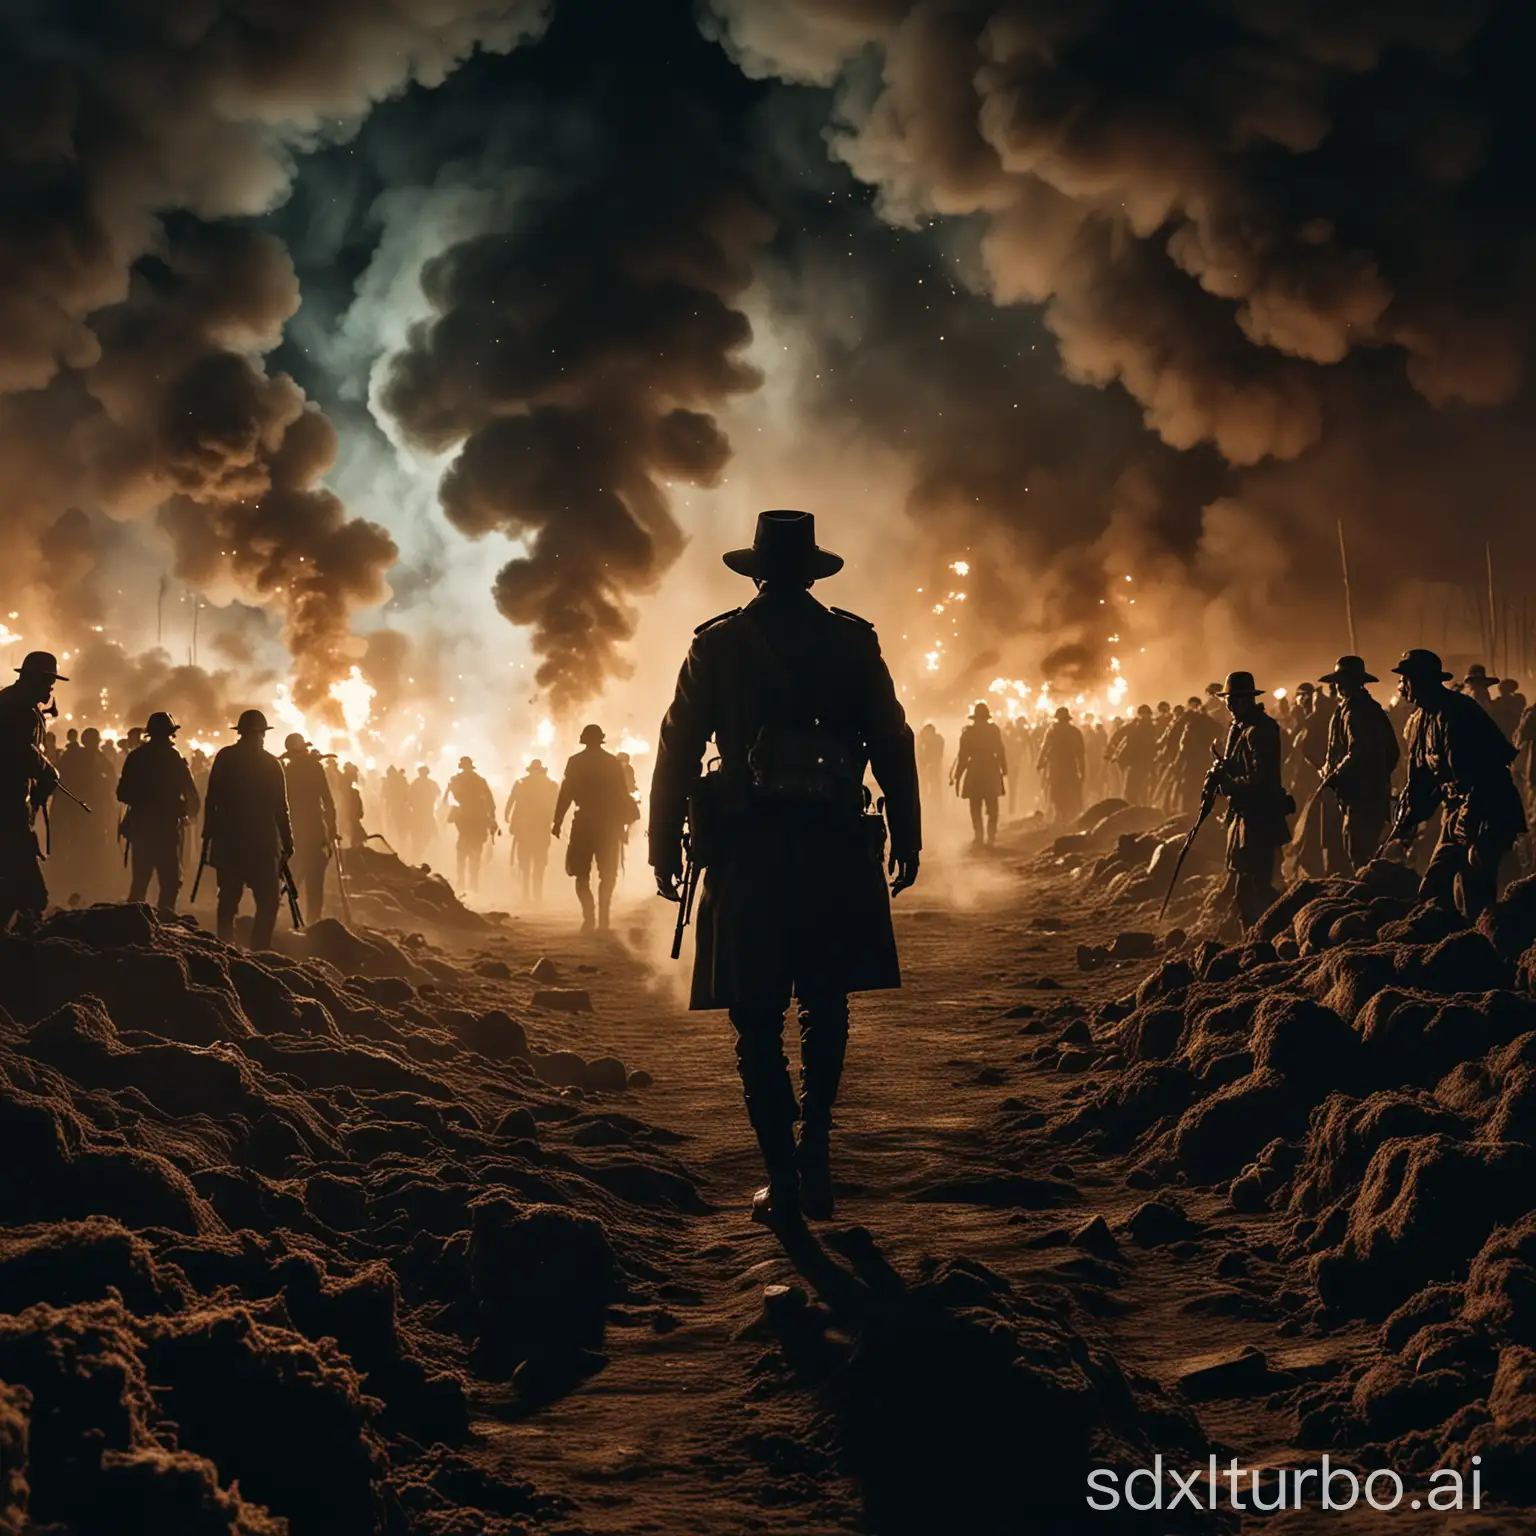 NeoFuturistic-War-Scene-with-SmokeFilled-Trenches-and-Panic